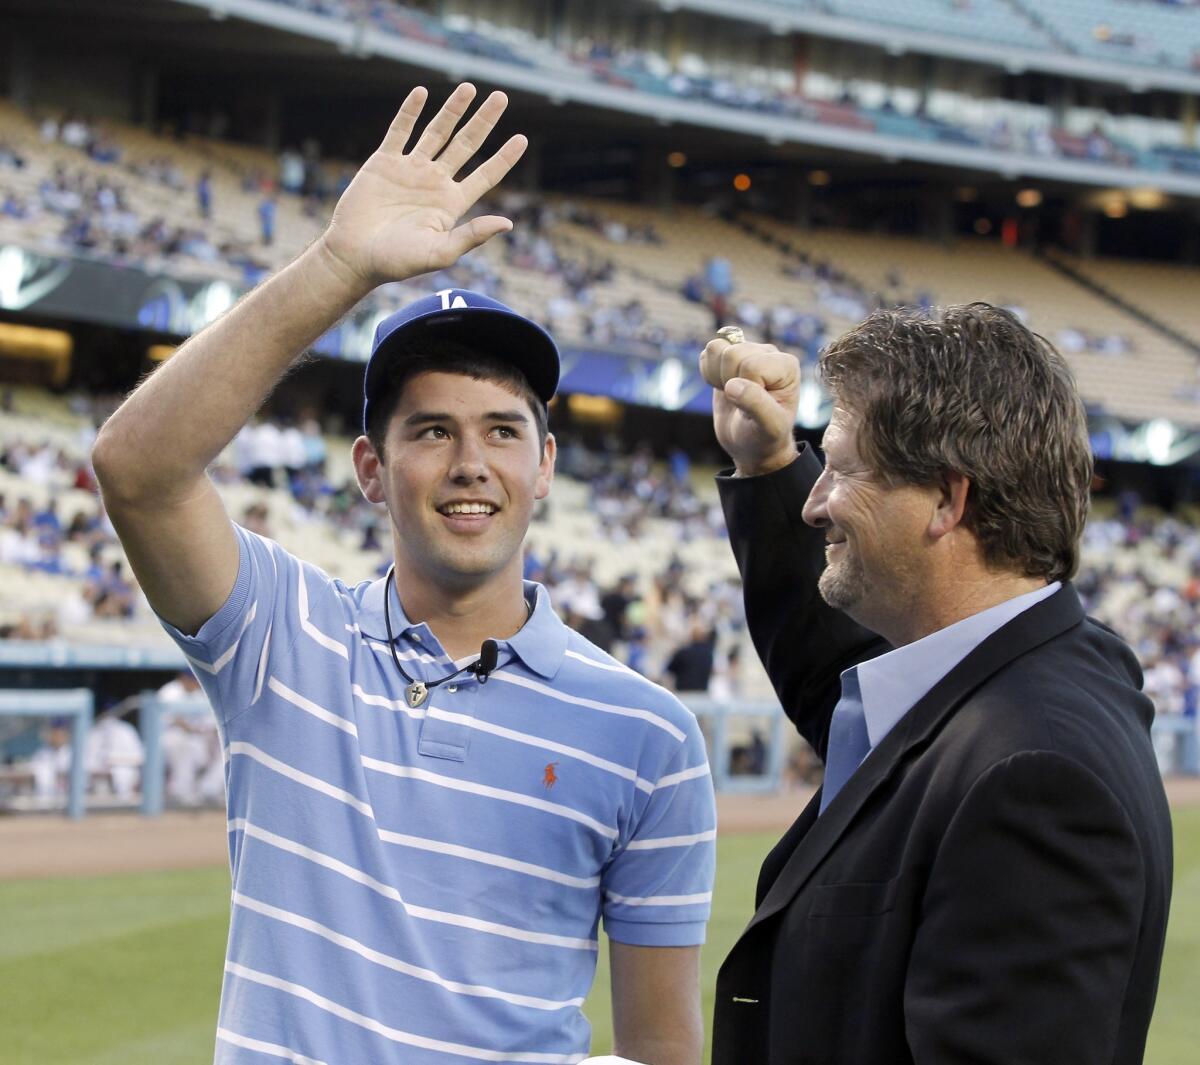 Logan White, right, introduces the team's top draft pick in 2010, Zach Lee, to the fans before a Dodgers game.